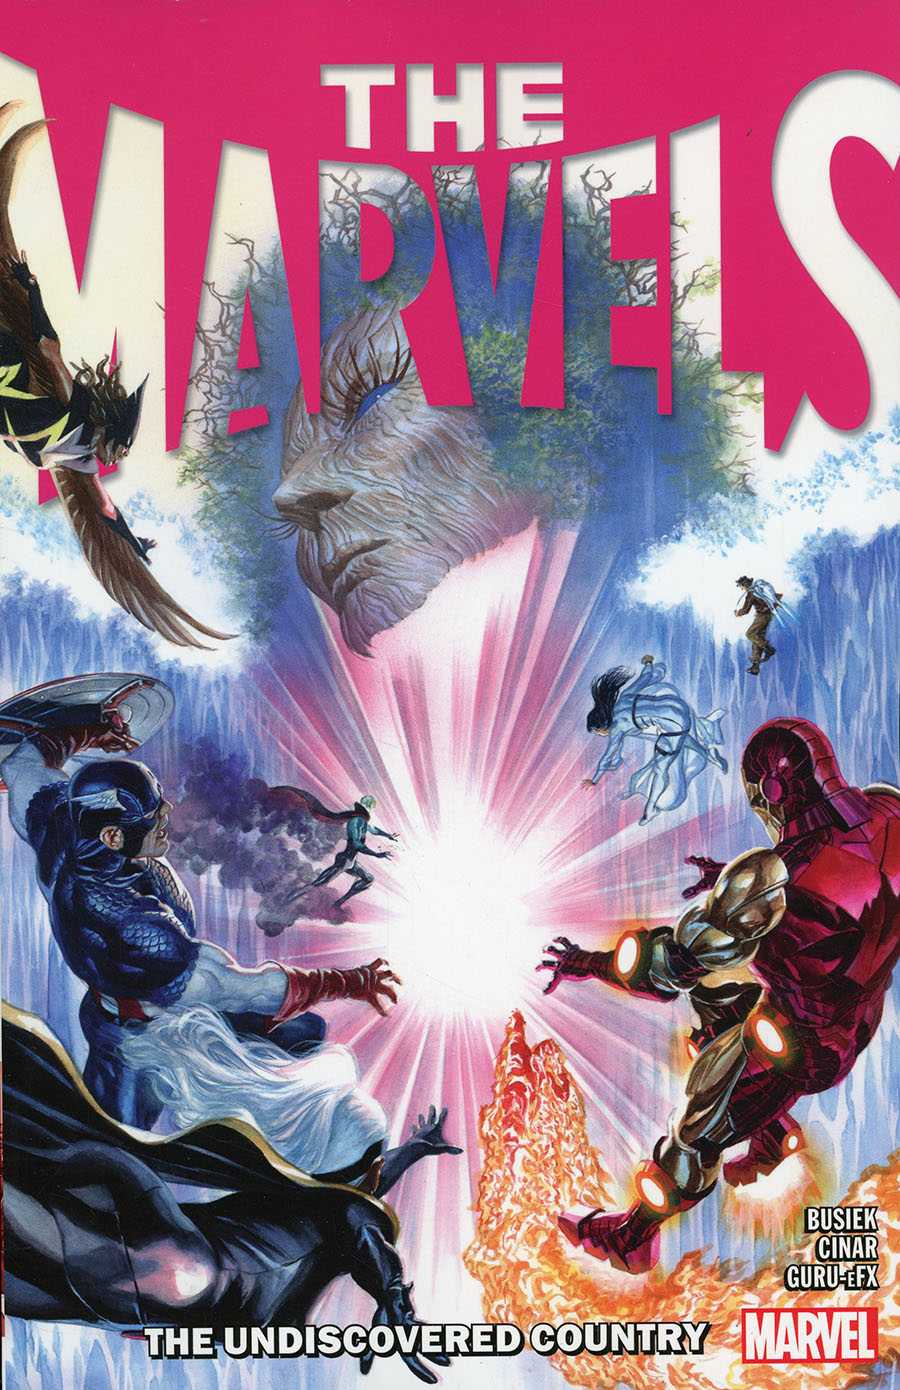 The Marvels Vol 2 Undiscovered Country TP